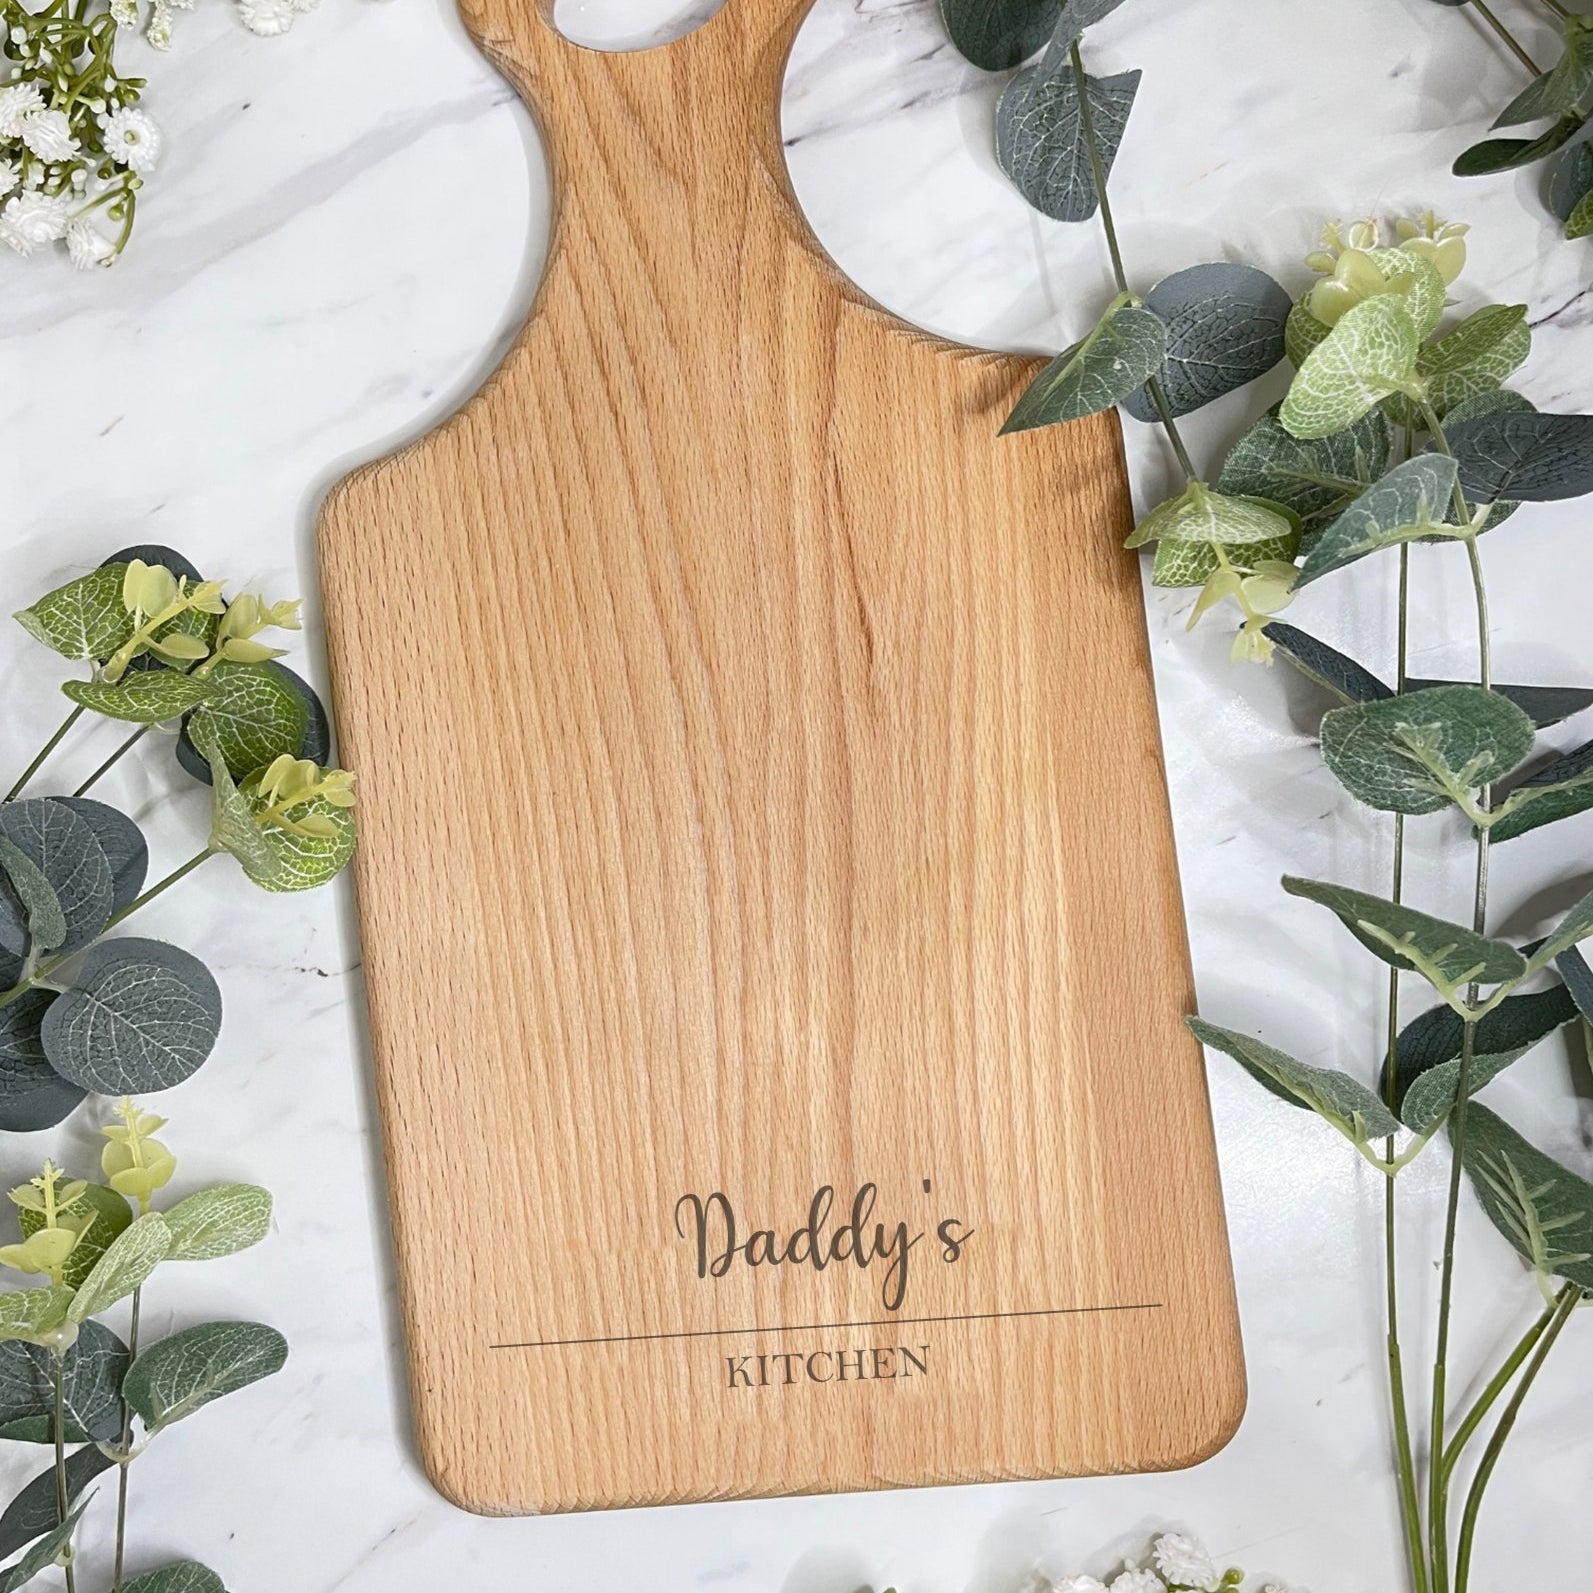 Thoughtful serving board gifts: Mother's Day, Father's Day, housewarmings, anniversaries, weddings, Christmas. Personalize up to 15-17 characters per line.